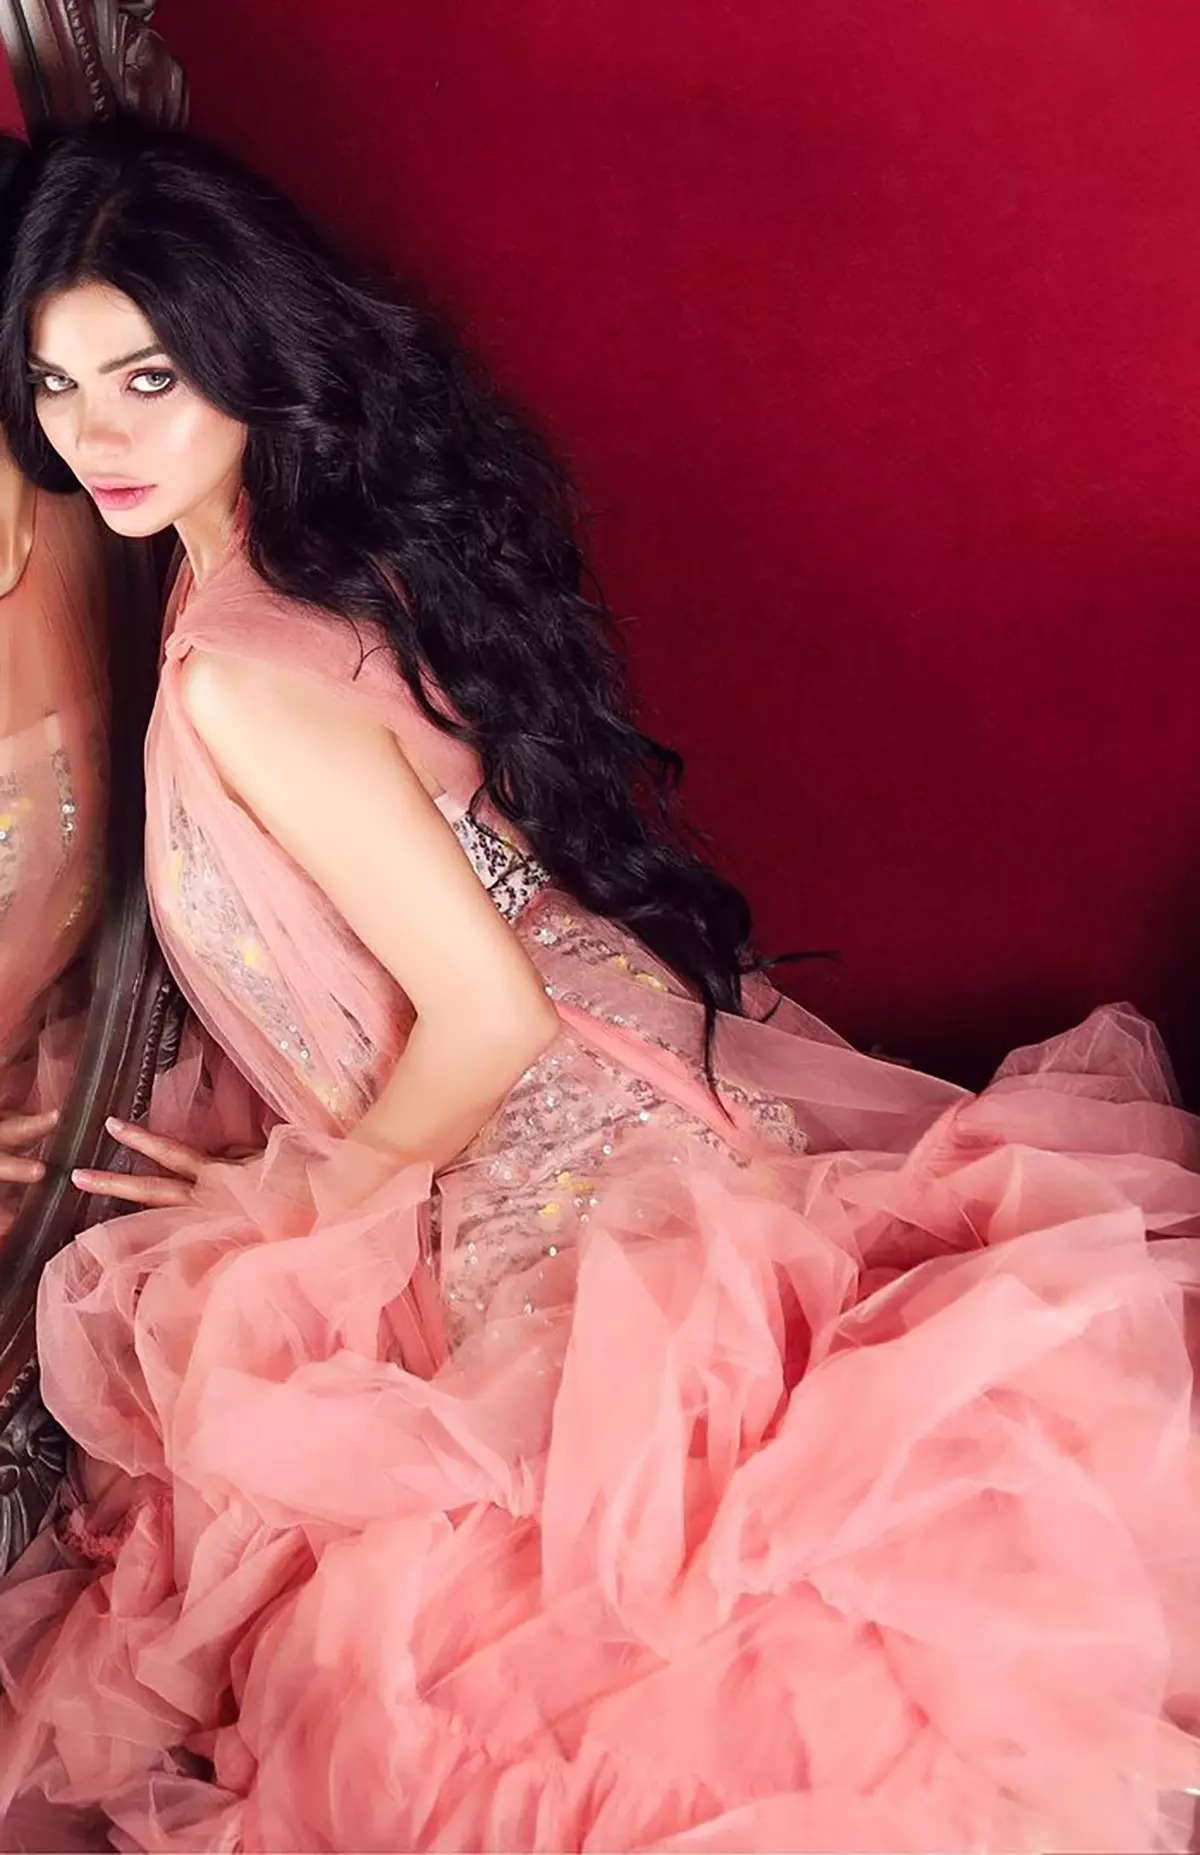 Pakistani model Sara Loren's beauty will make you fall for her even more